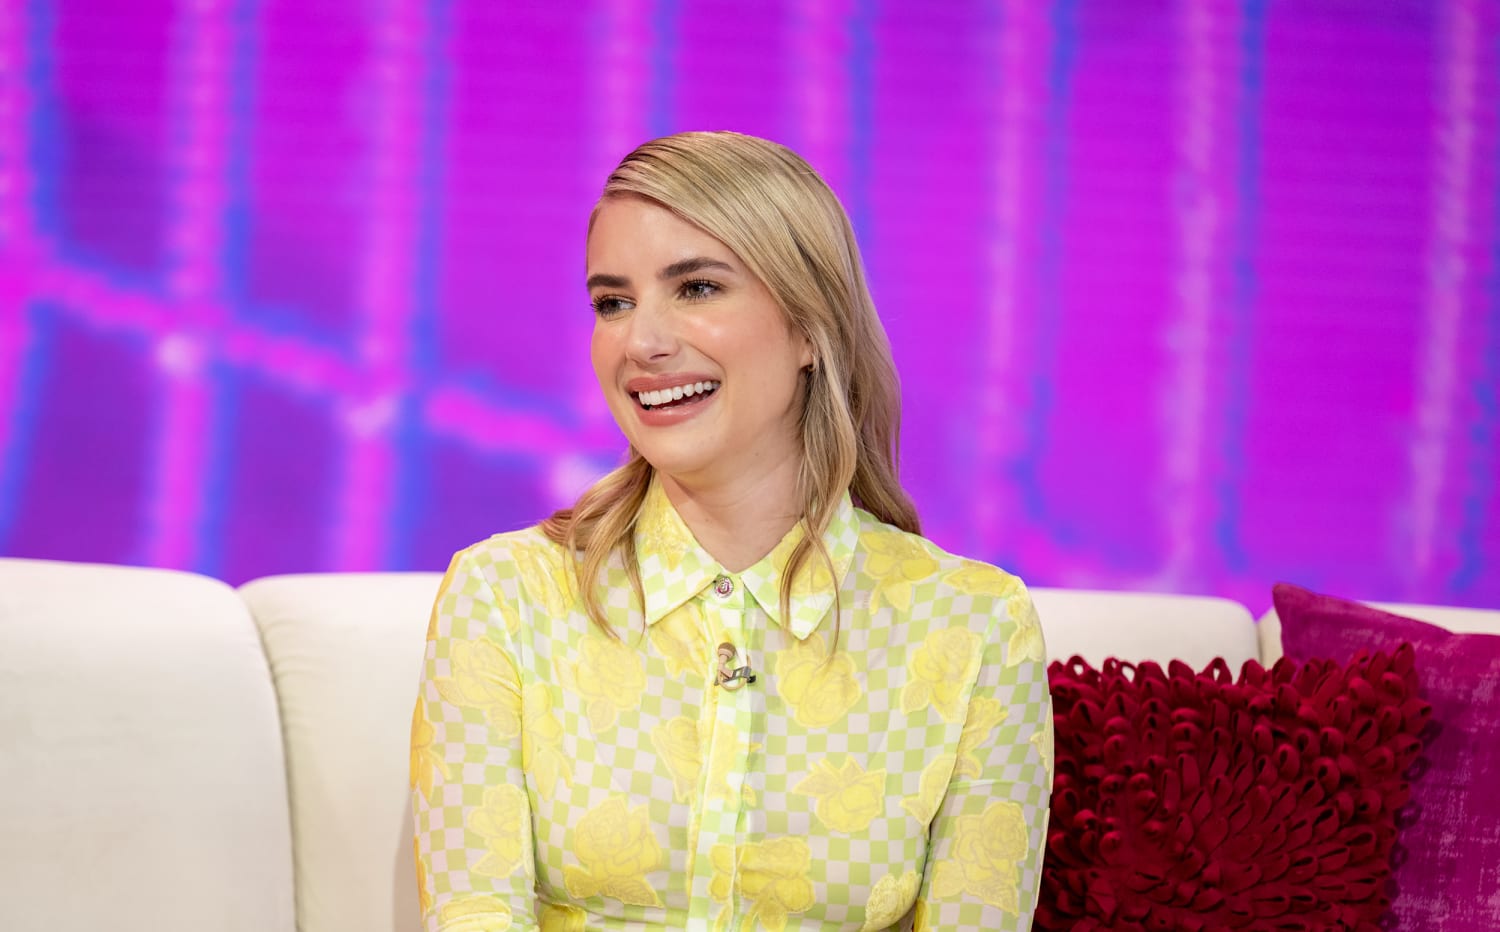 Emma Roberts hilariously explains how she's trying to teach her 3-year-old son manners